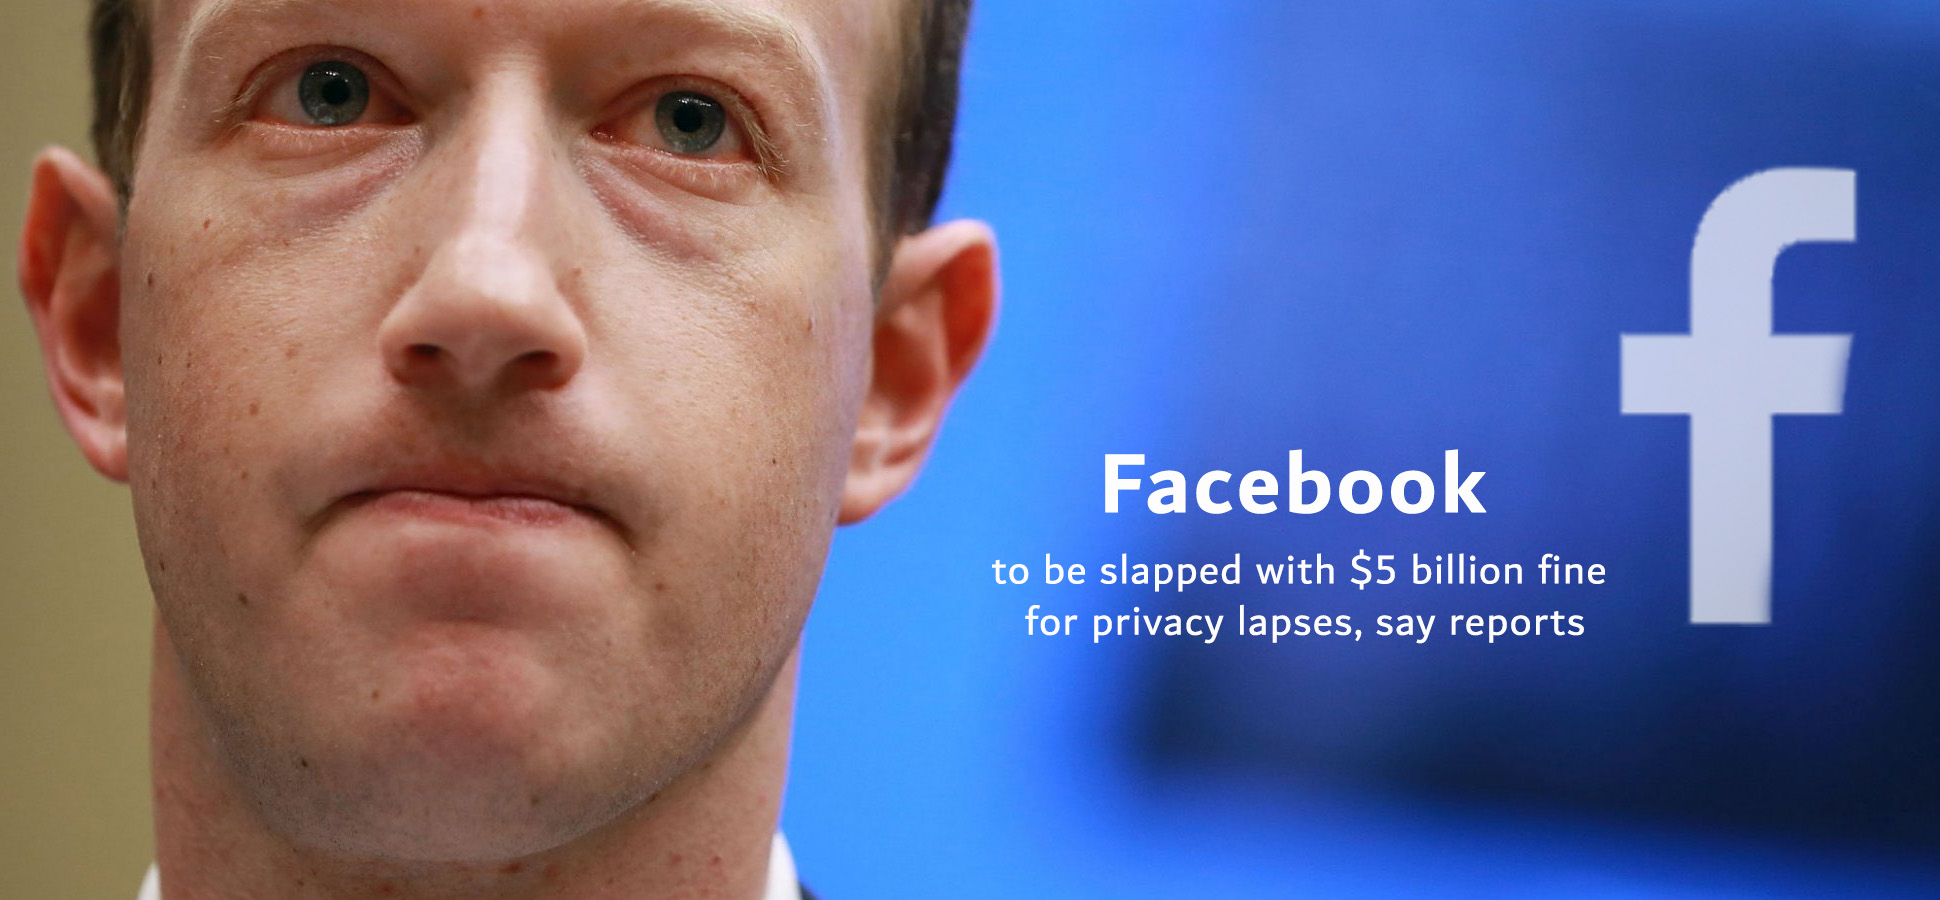 $5 billion Fined to Facebook by FTC for Privacy Lapses